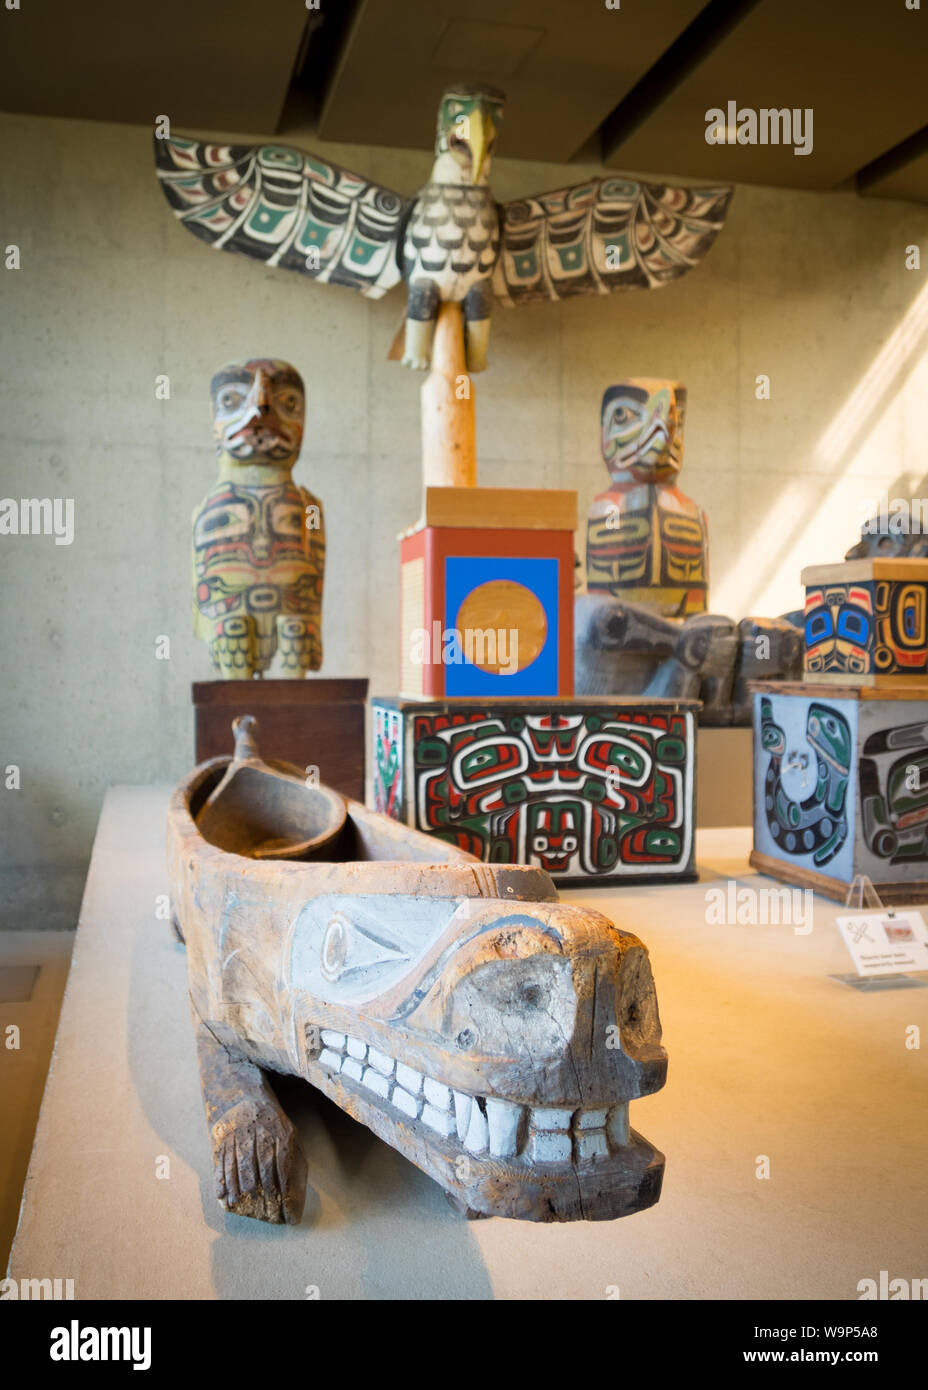 A potlatch serving dish and various First Nations totem poles and art in the University of British Columbia Museum of Anthropology in Vancouver Canada Stock Photo